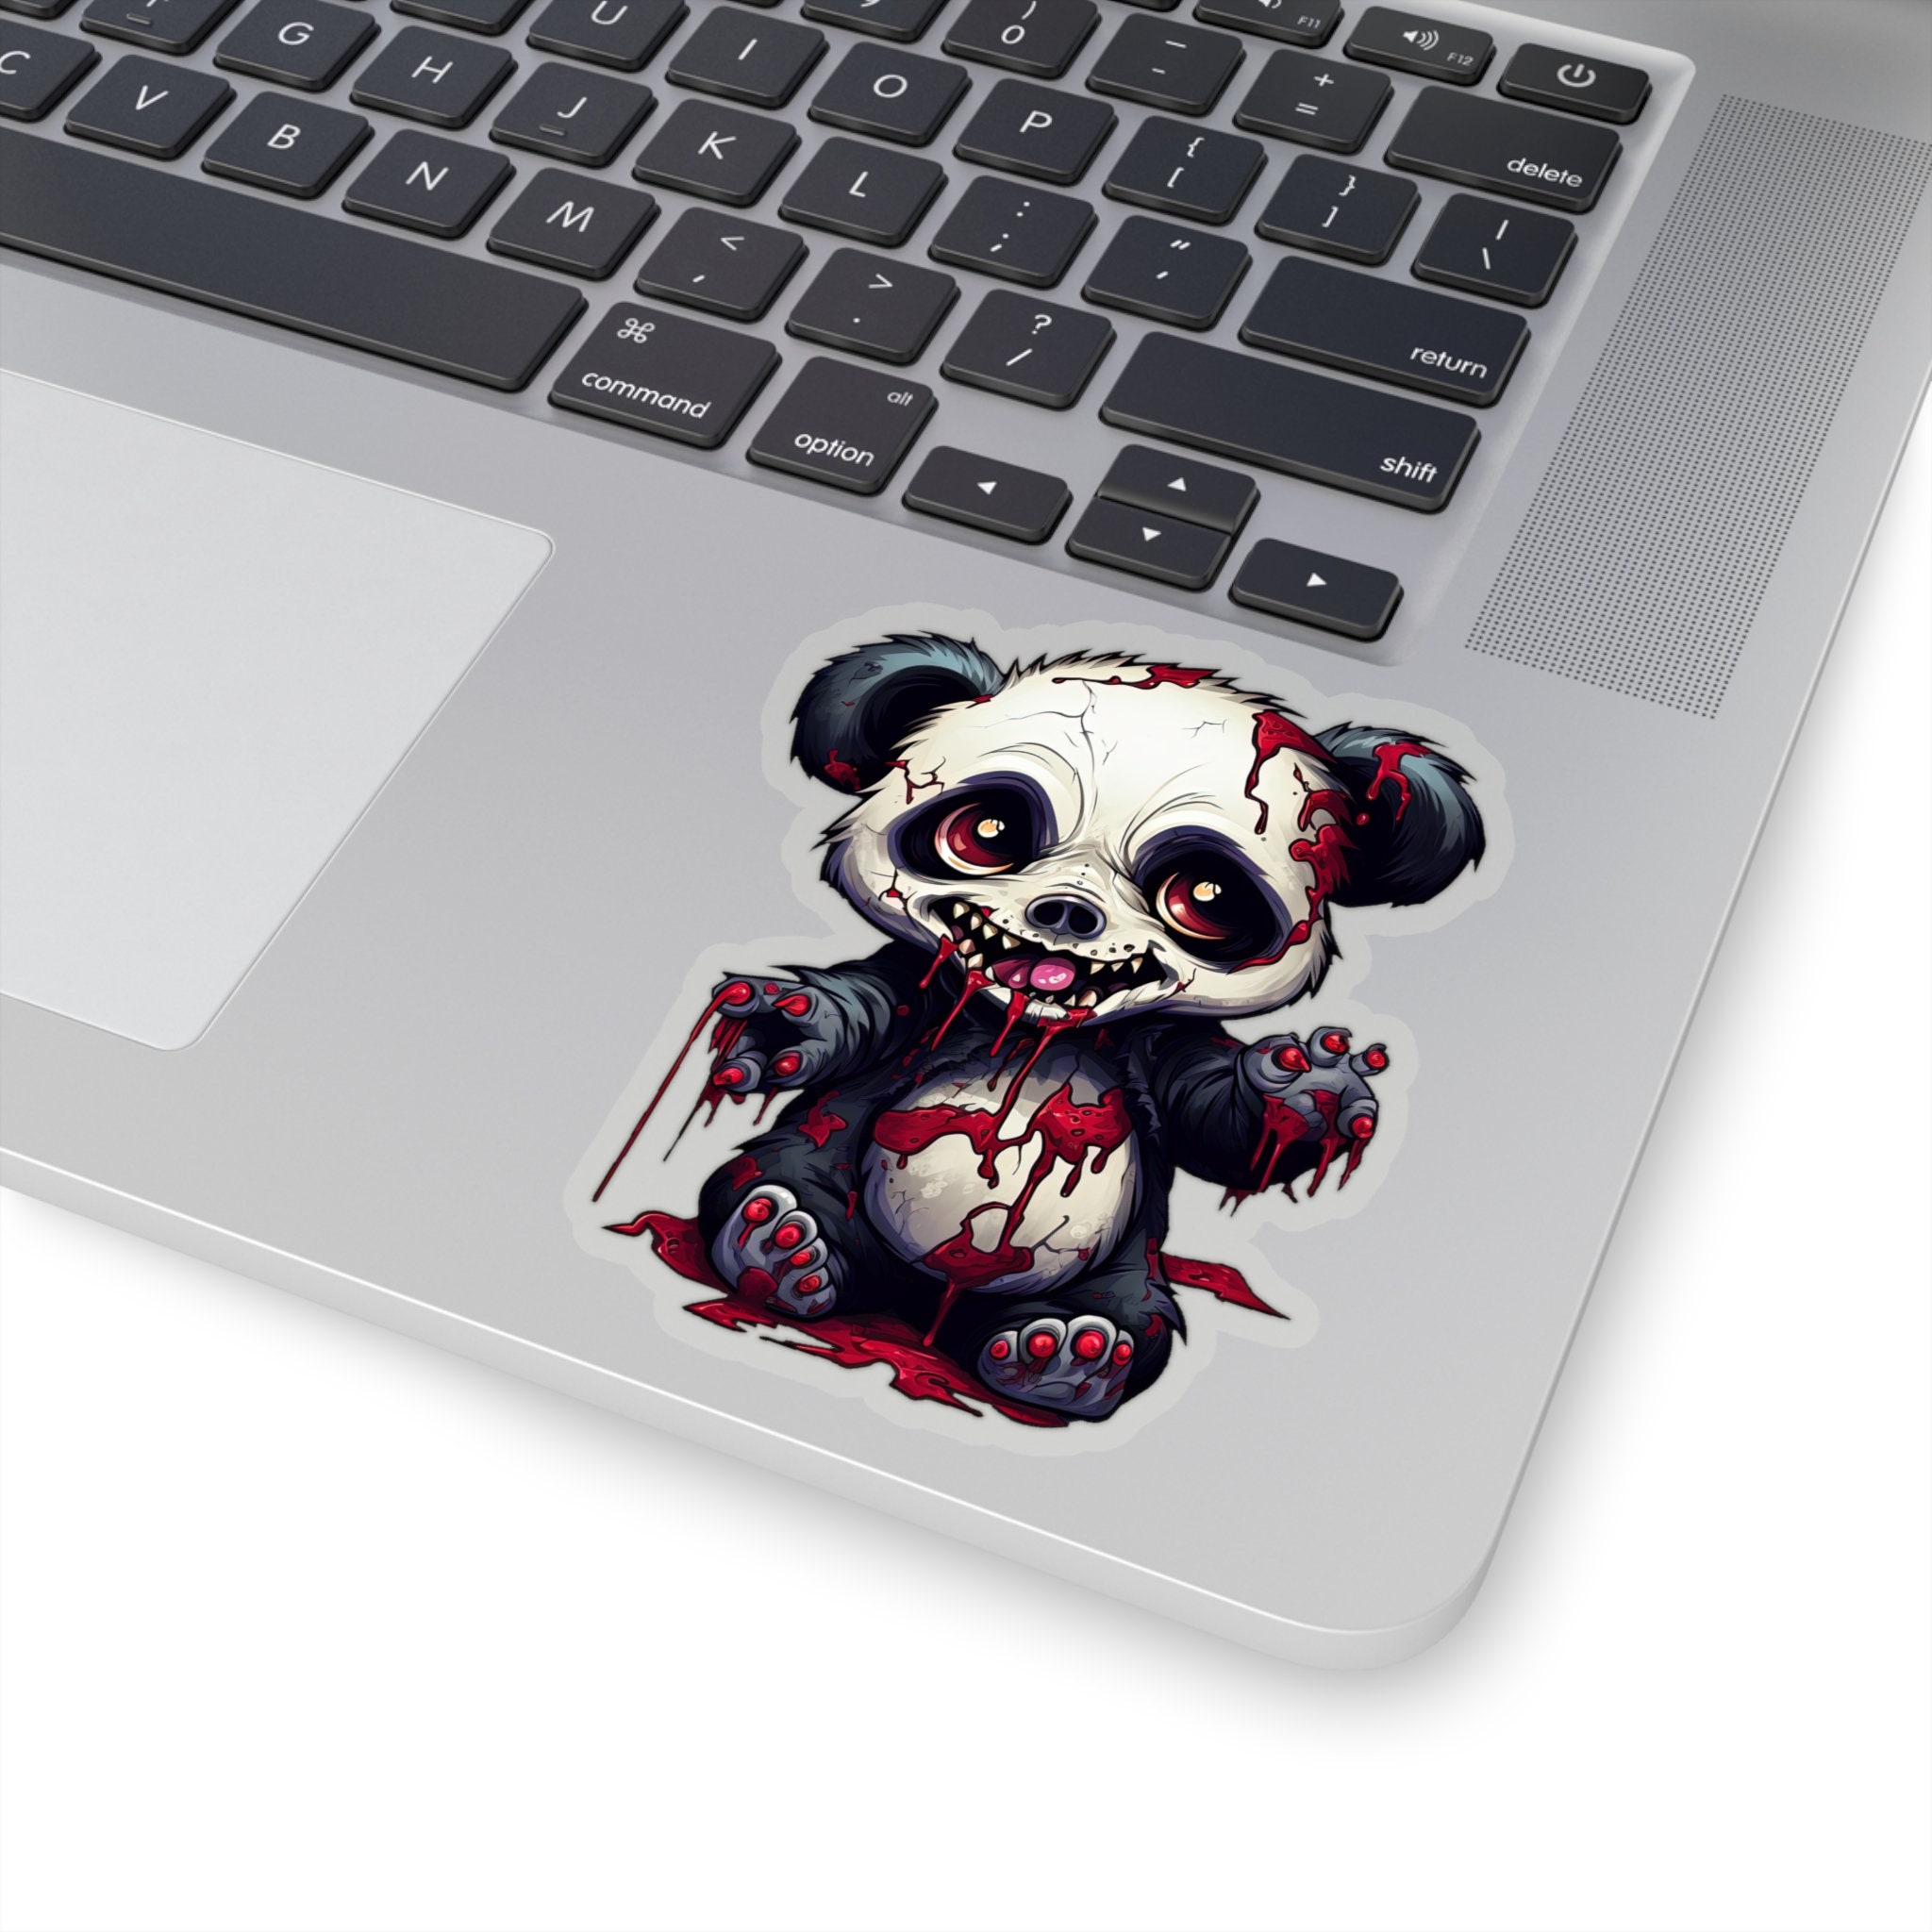 Discover Baby Zombie Panda Sticker - An Unearthly Blend of Cuteness and Horror